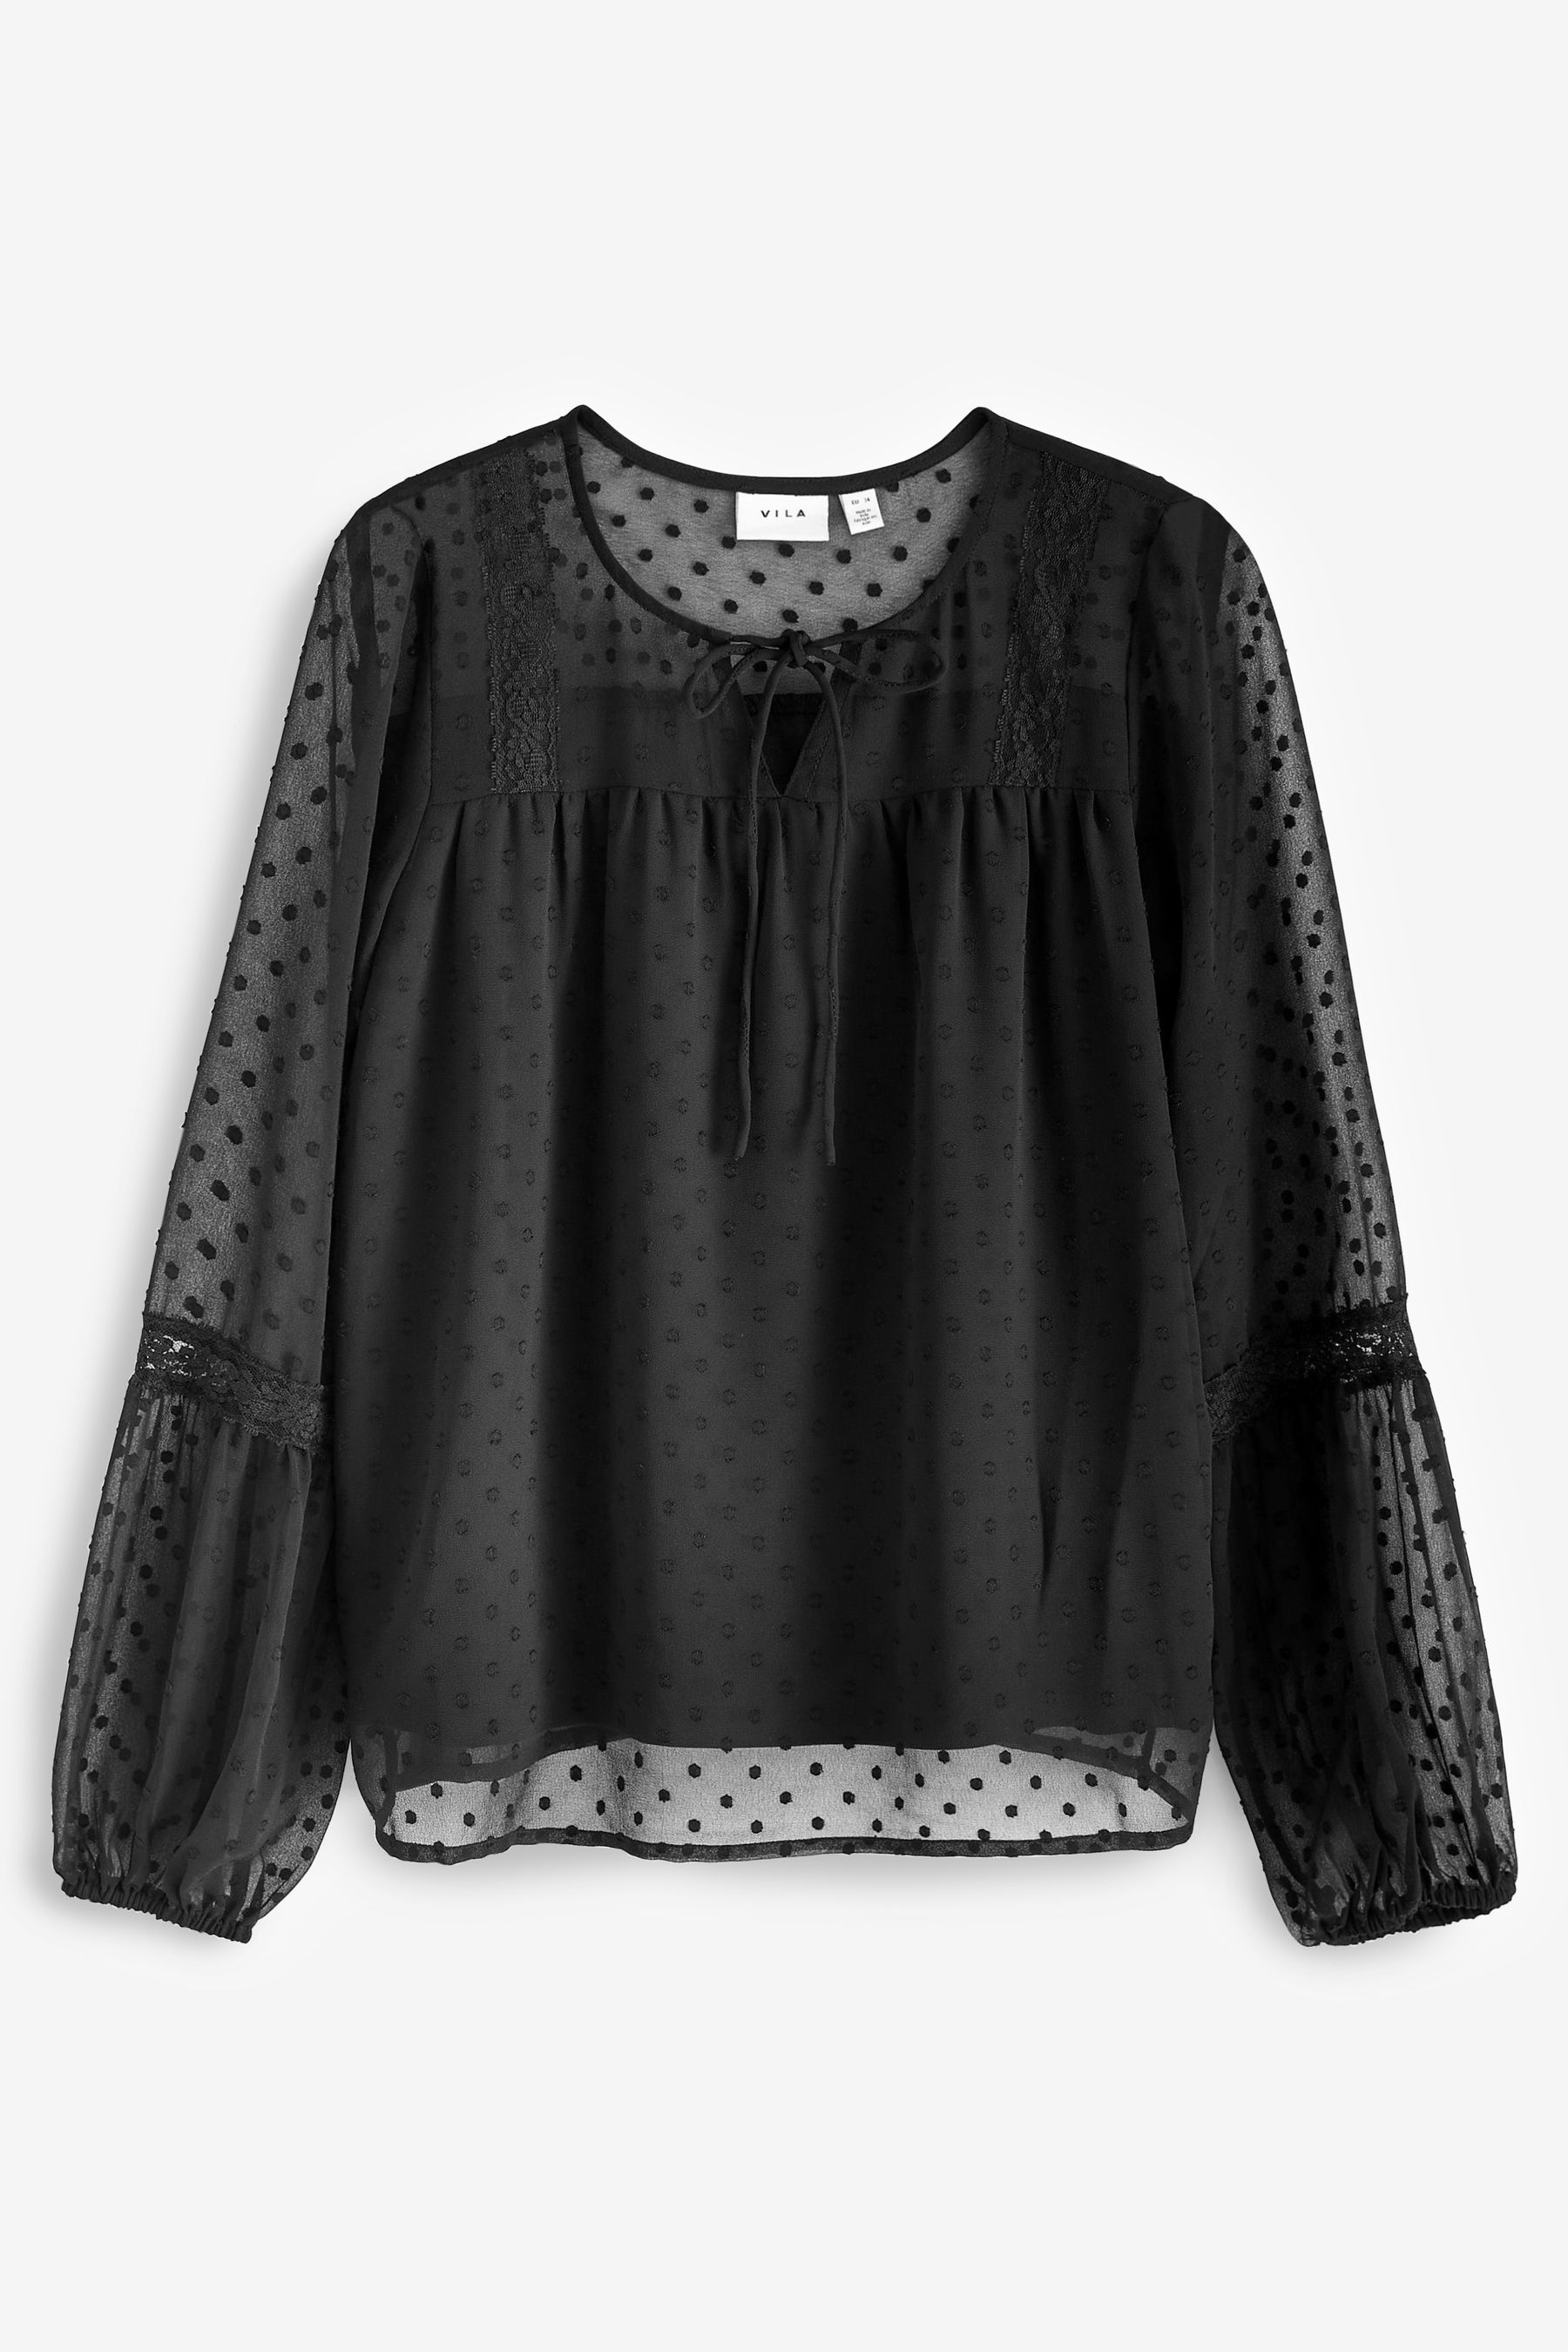 Buy VILA Dobby and Lace Detail Blouse from the Next UK online shop